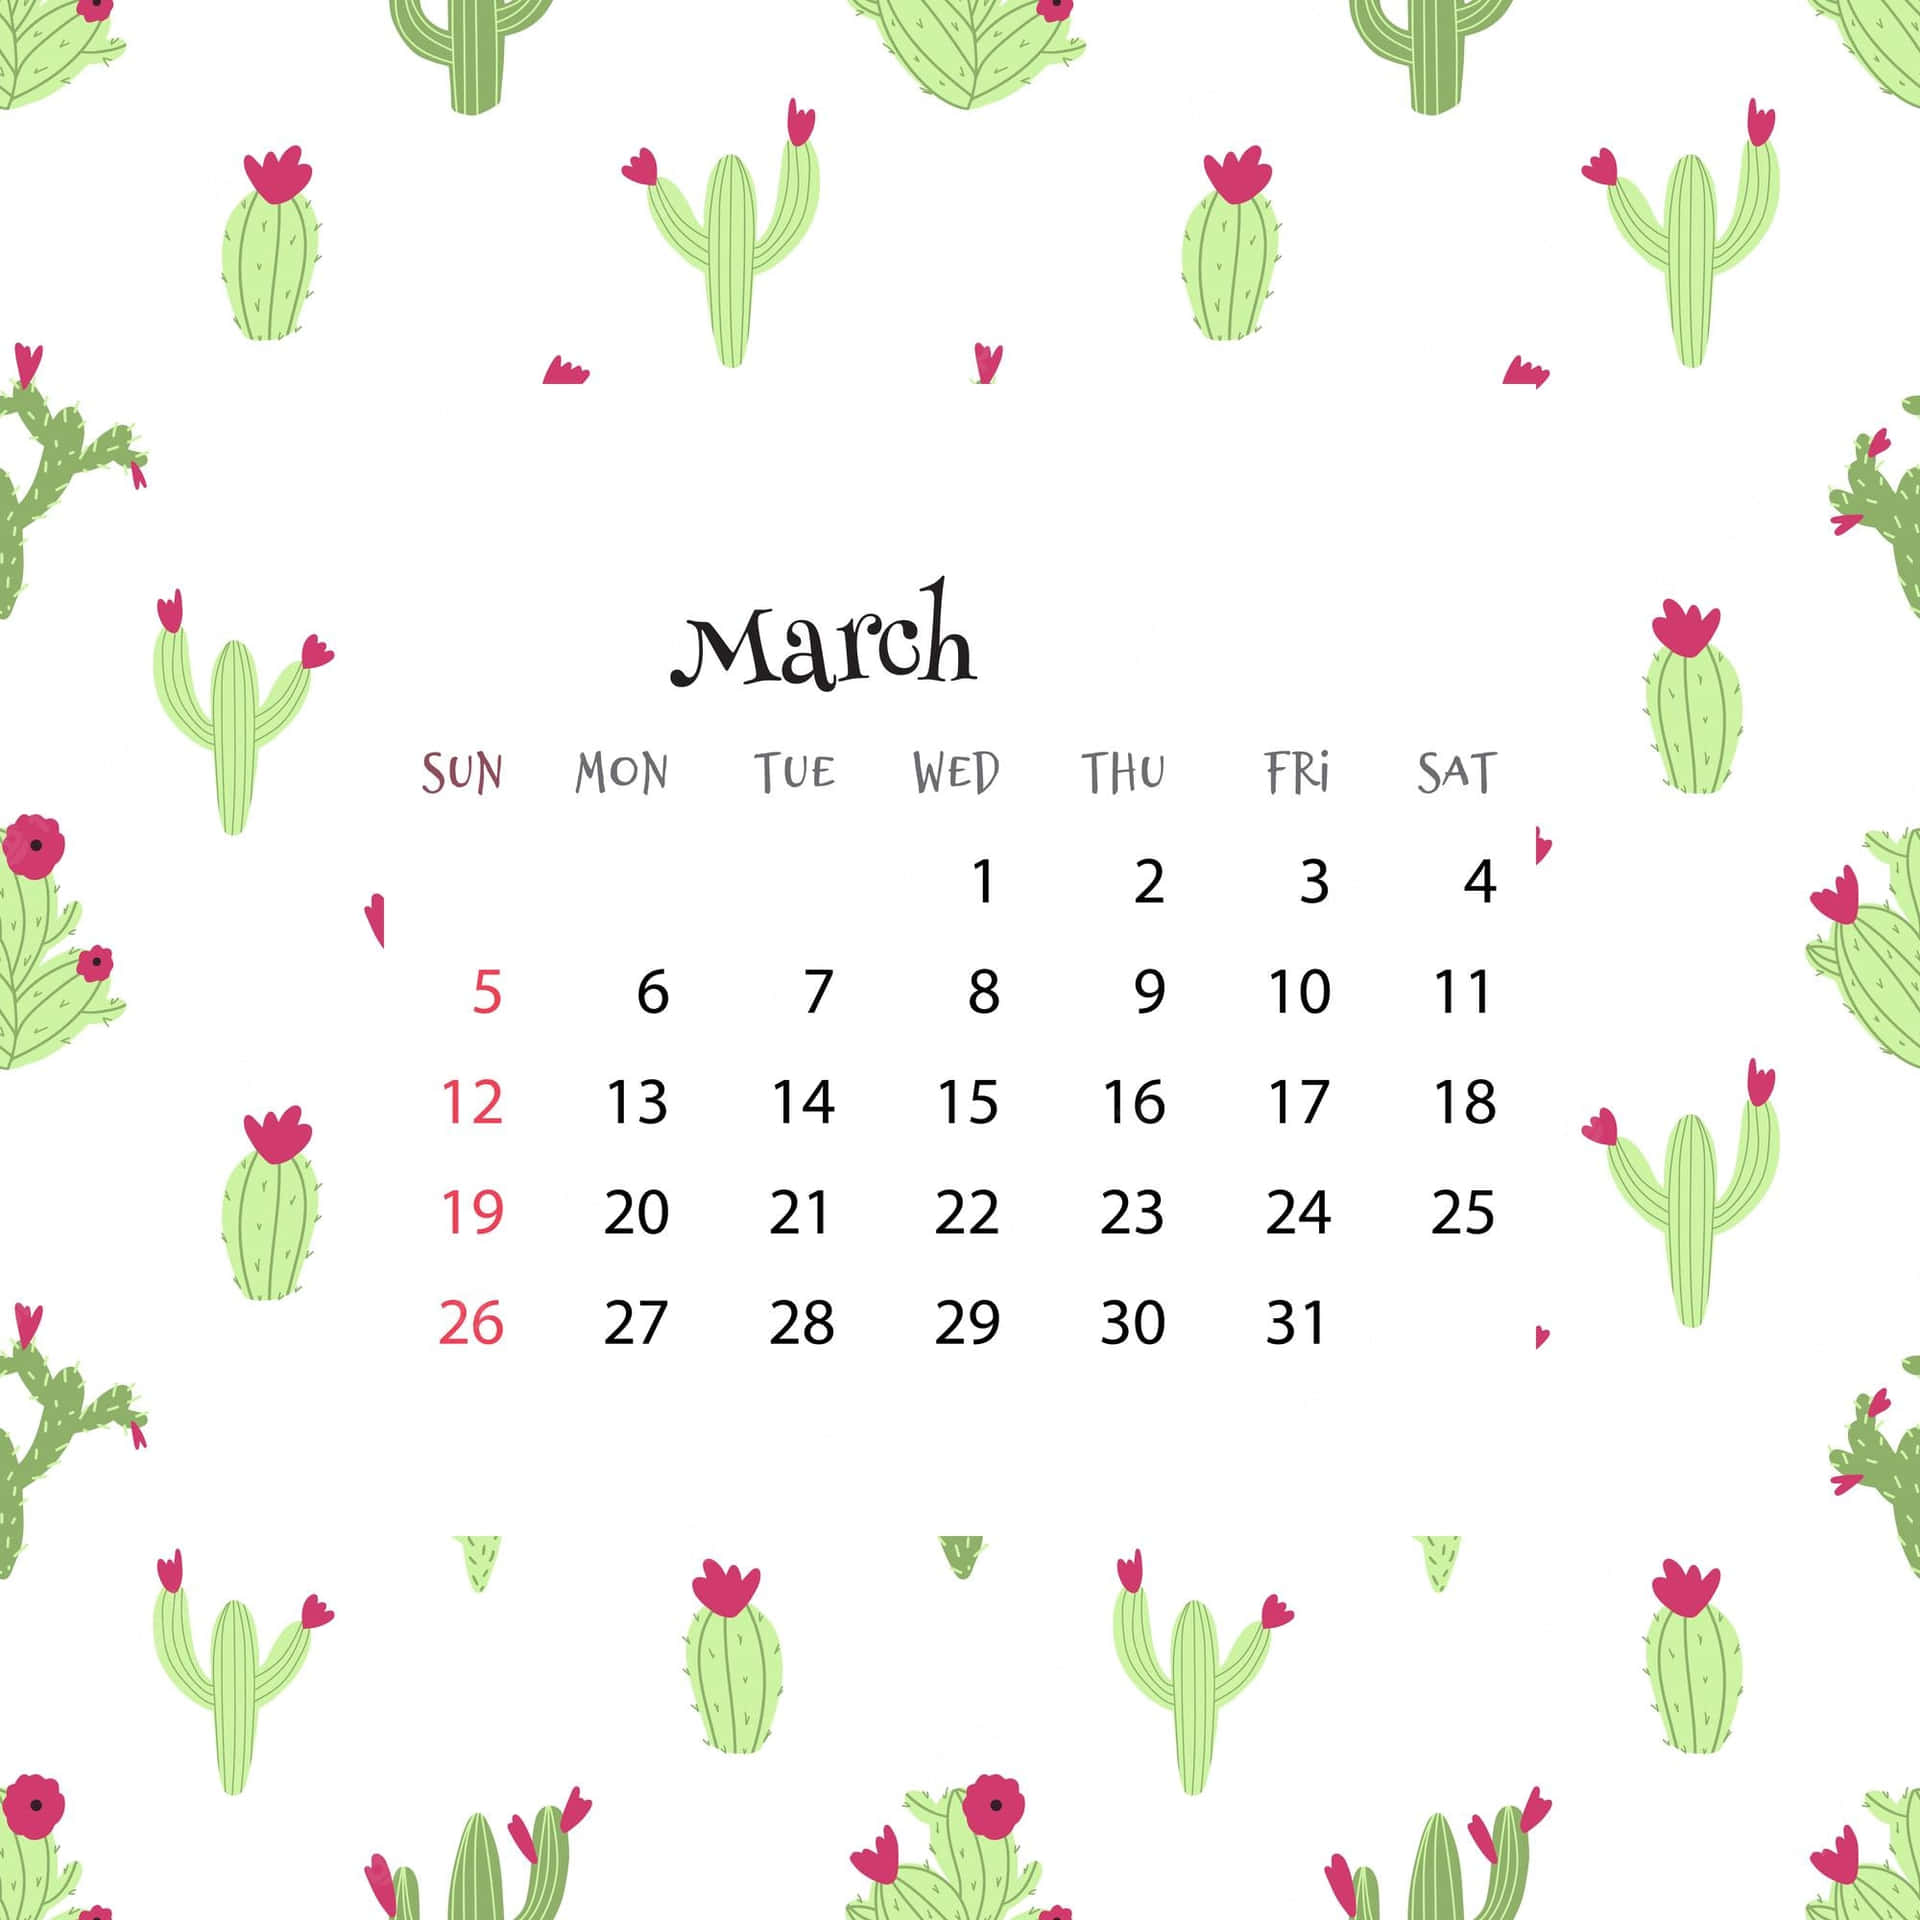 A Calendar With Cactus Plants On It